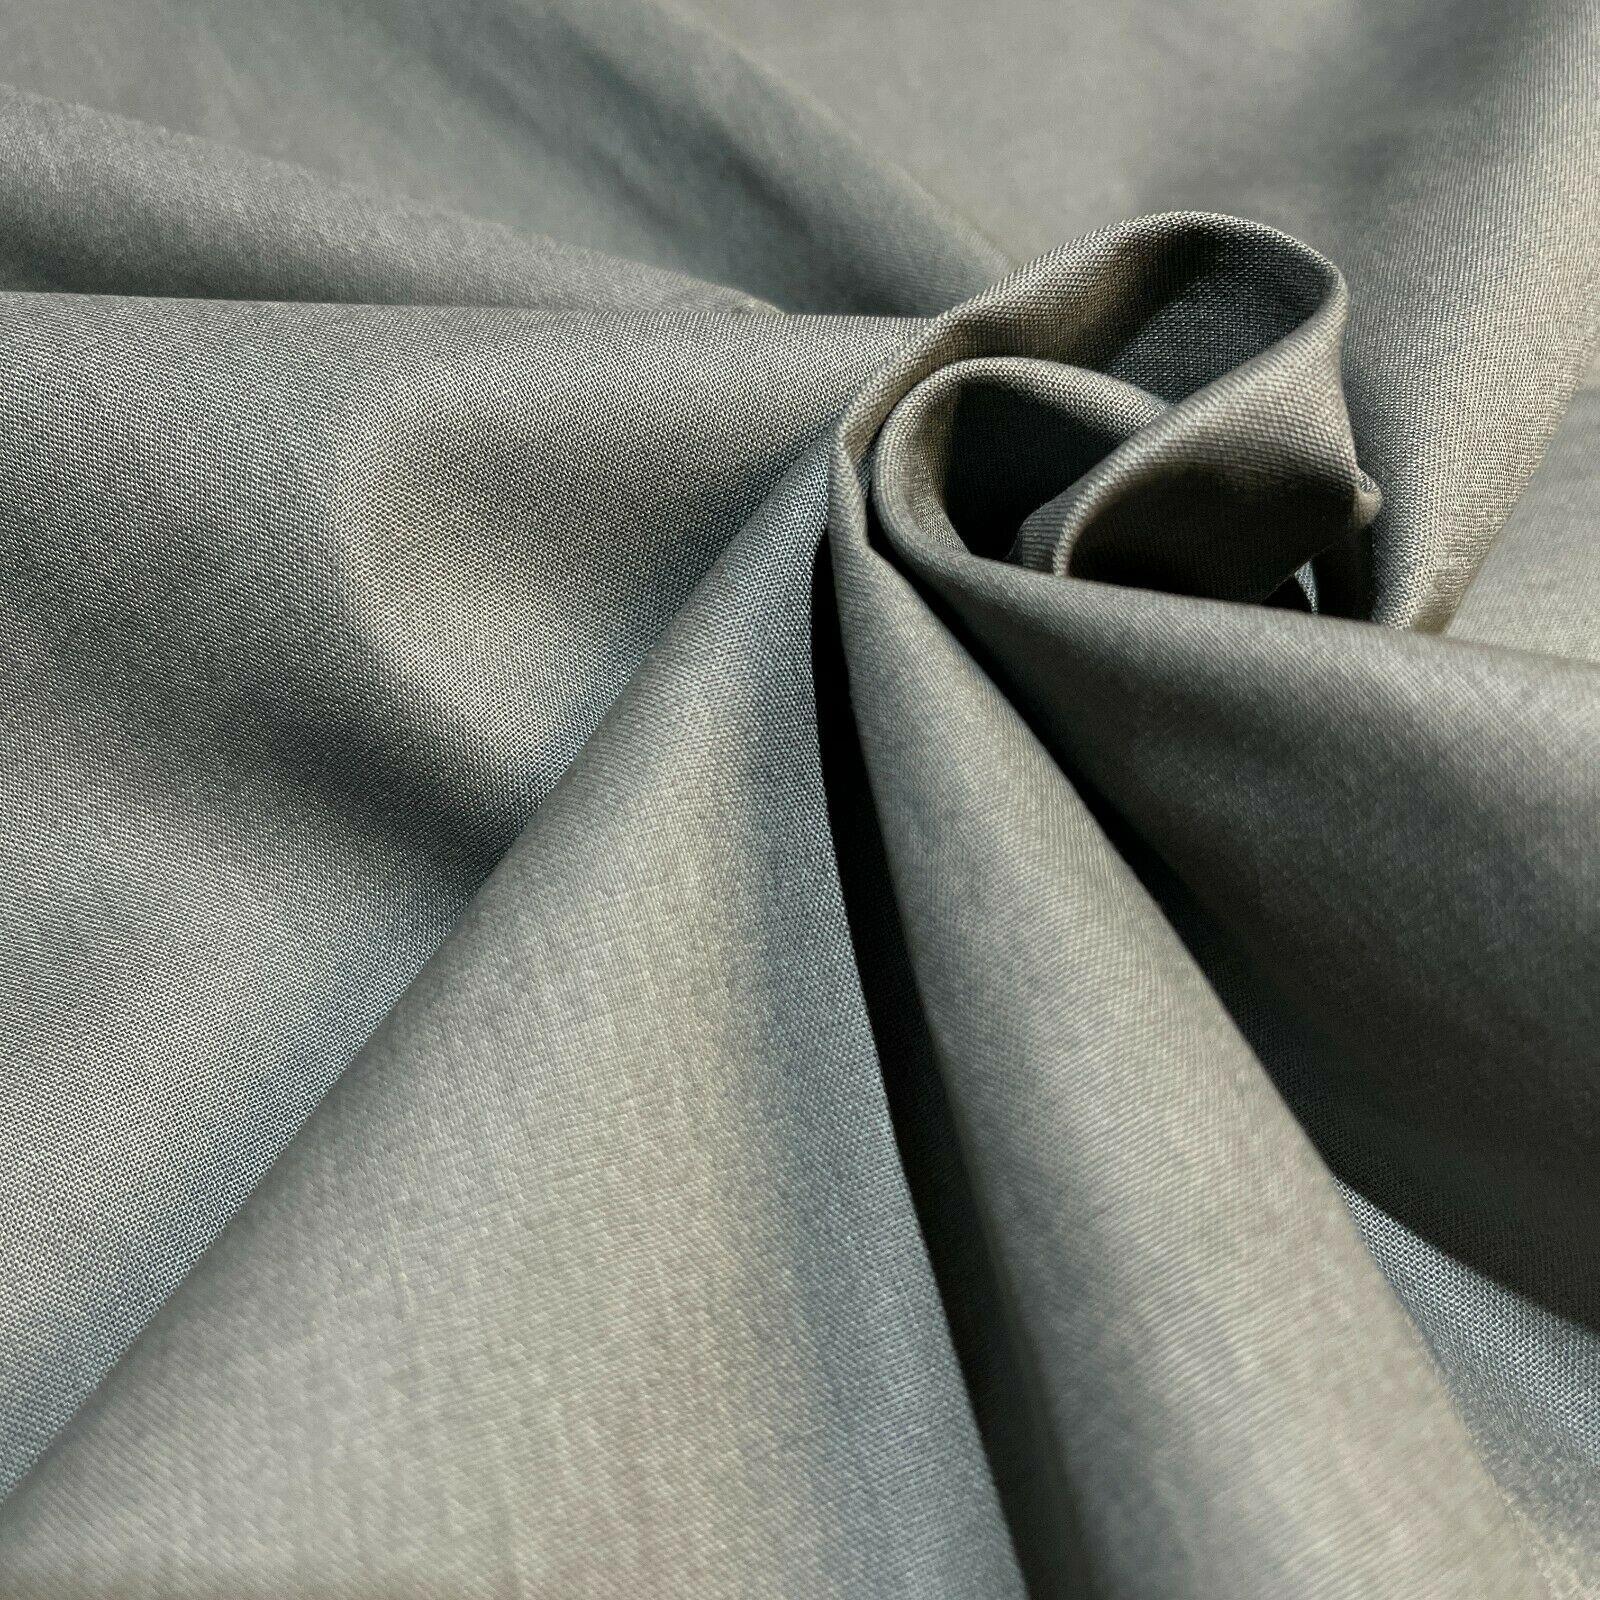 Plain dyed 100% Crafting Cotton Sheeting Fabric M1578